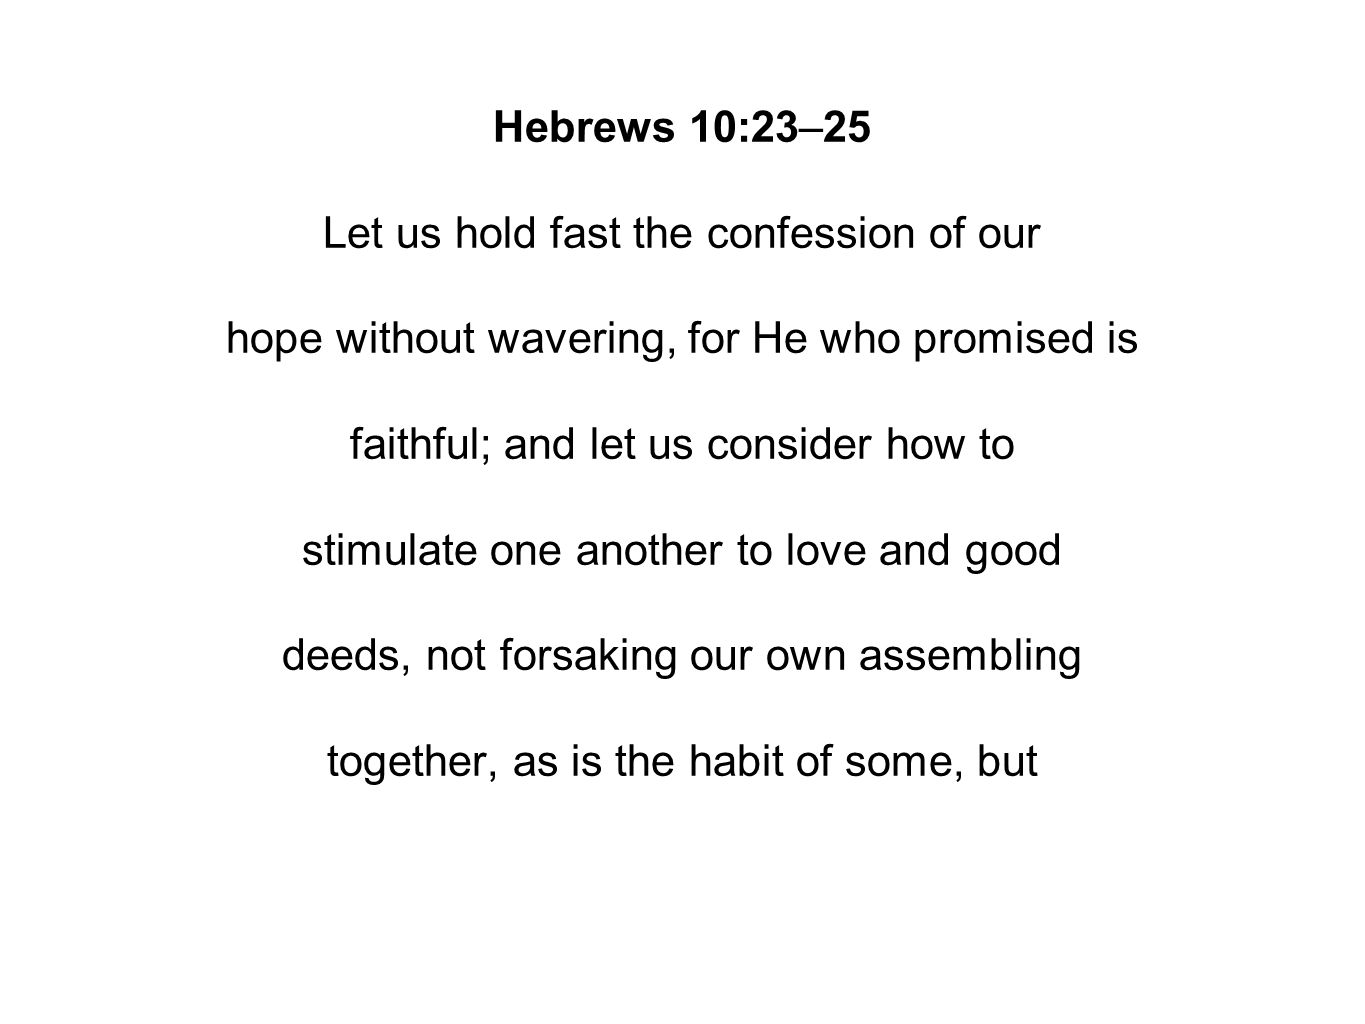 Hebrews 10:23–25 Let us hold fast the confession of our hope without wavering, for He who promised is faithful; and let us consider how to stimulate one another to love and good deeds, not forsaking our own assembling together, as is the habit of some, but